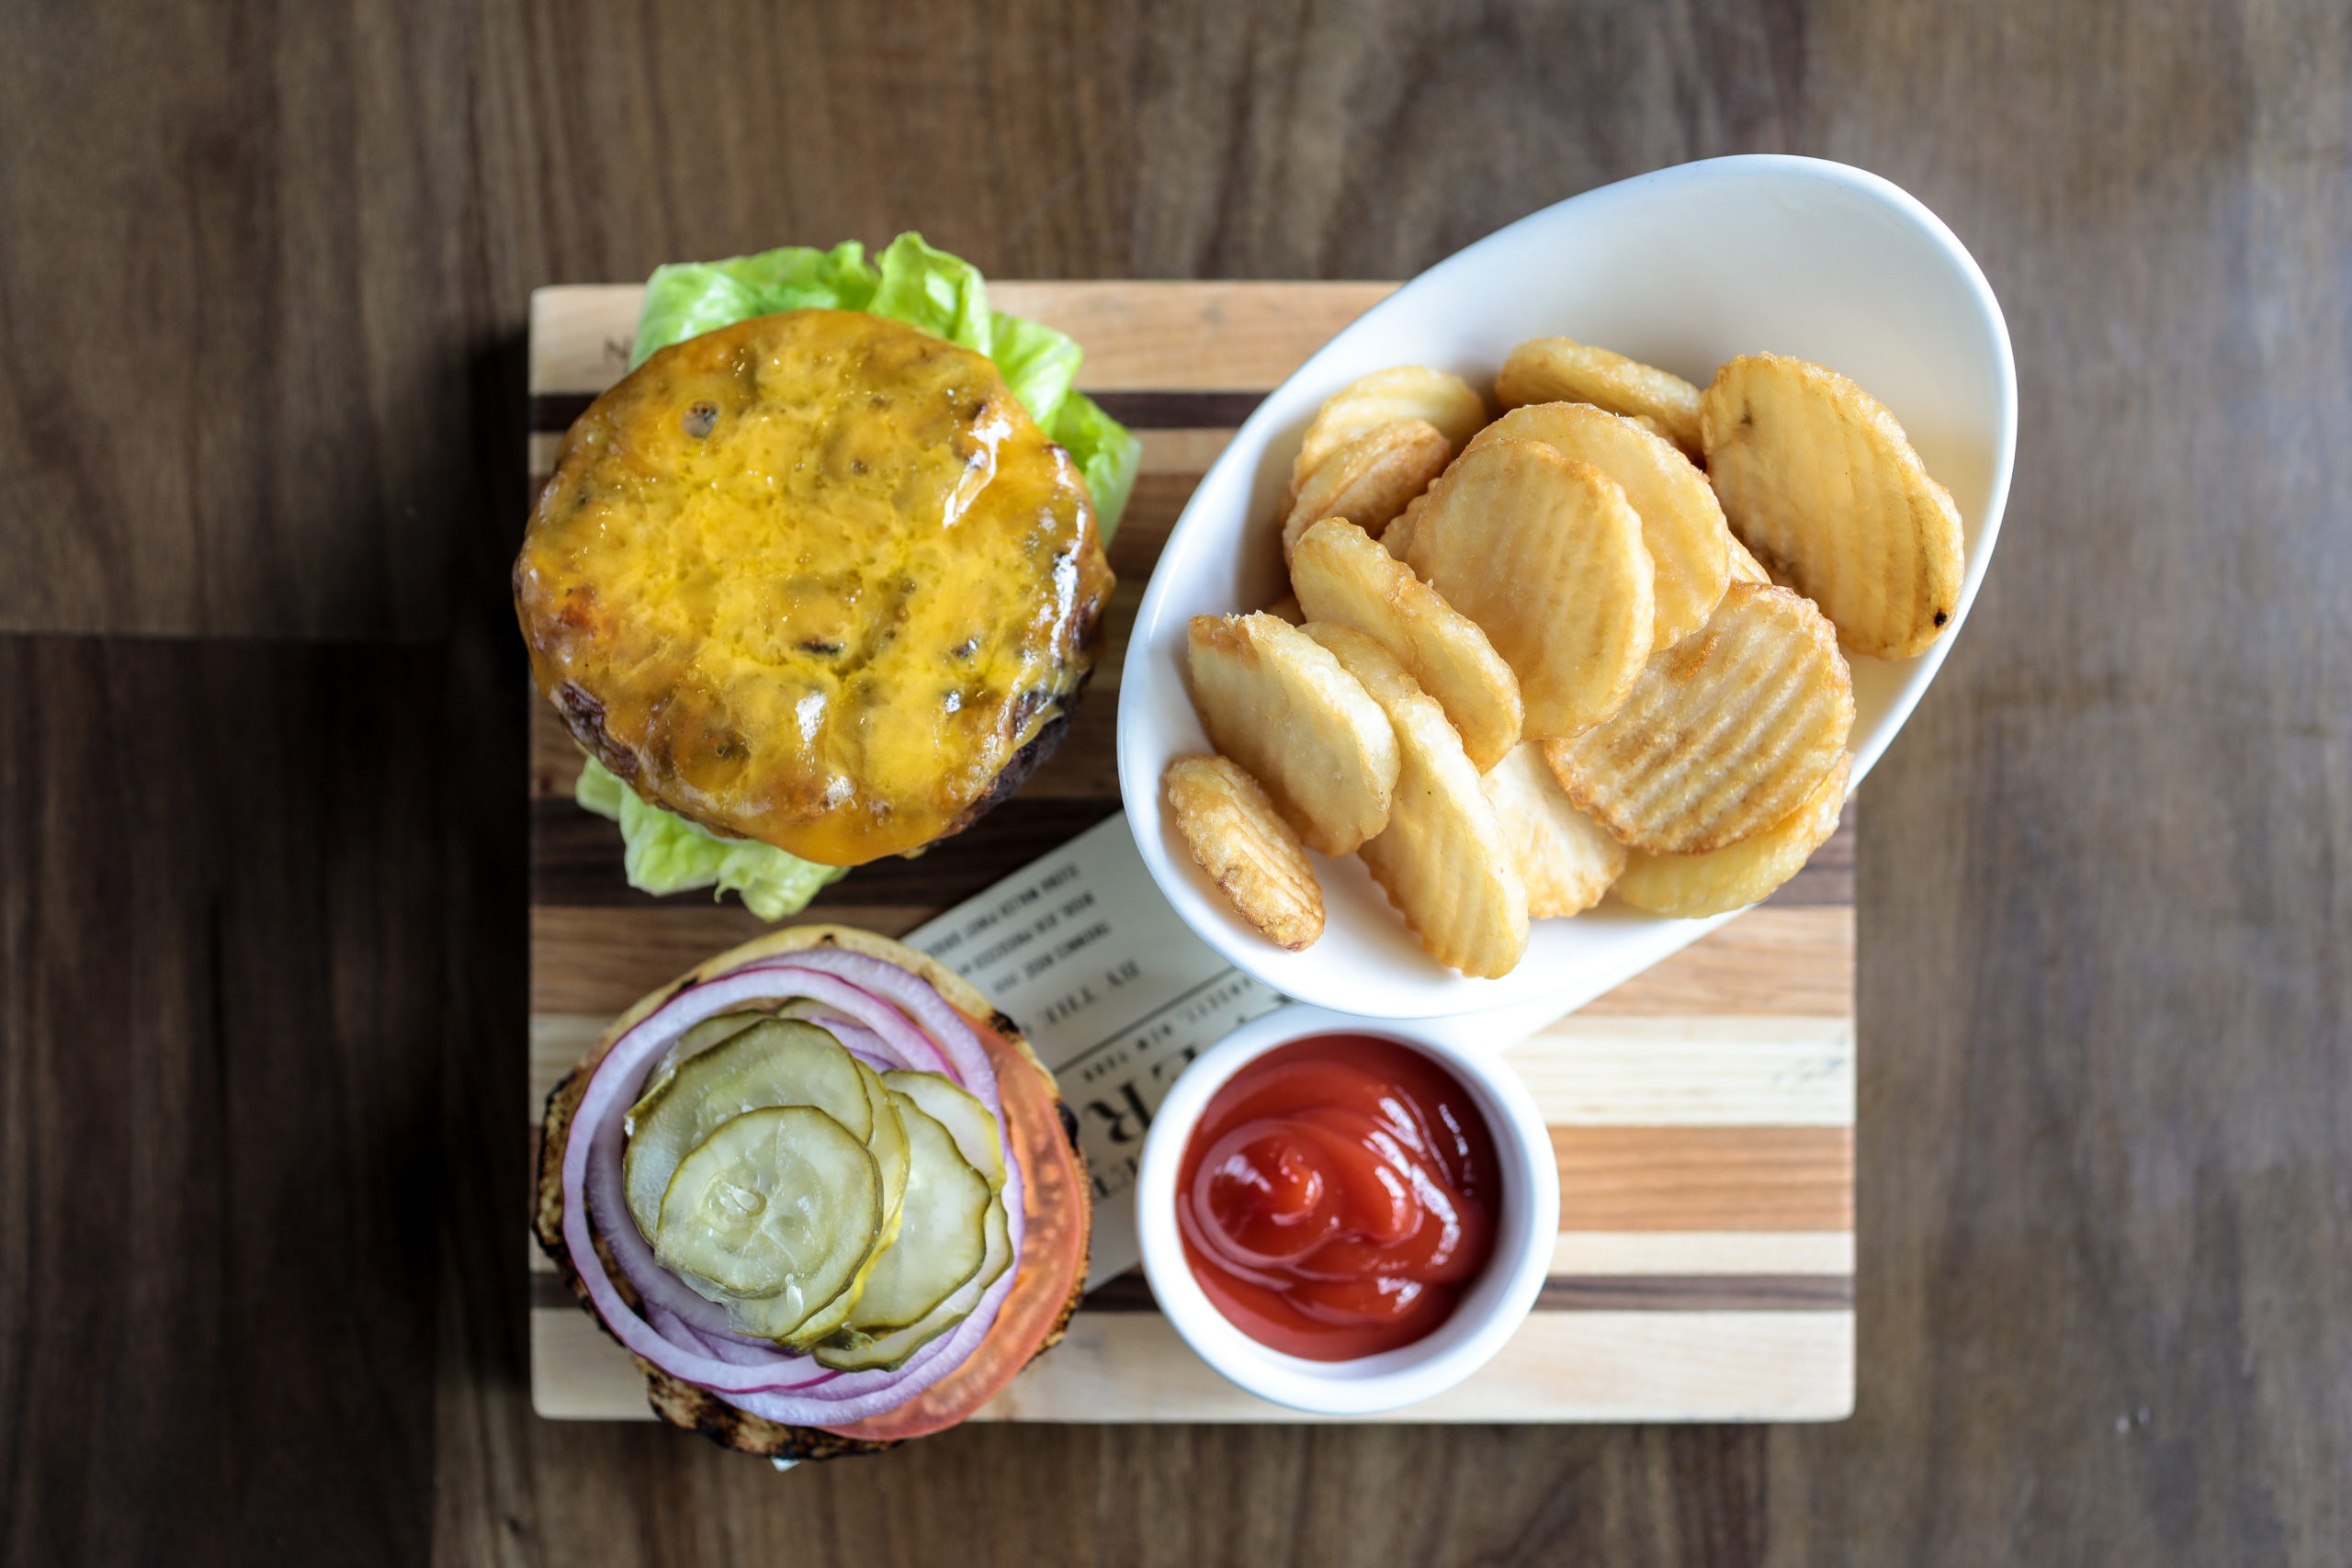 The Tavern burger is available for late night indulgence at Main Street Tavern in Amagansett.